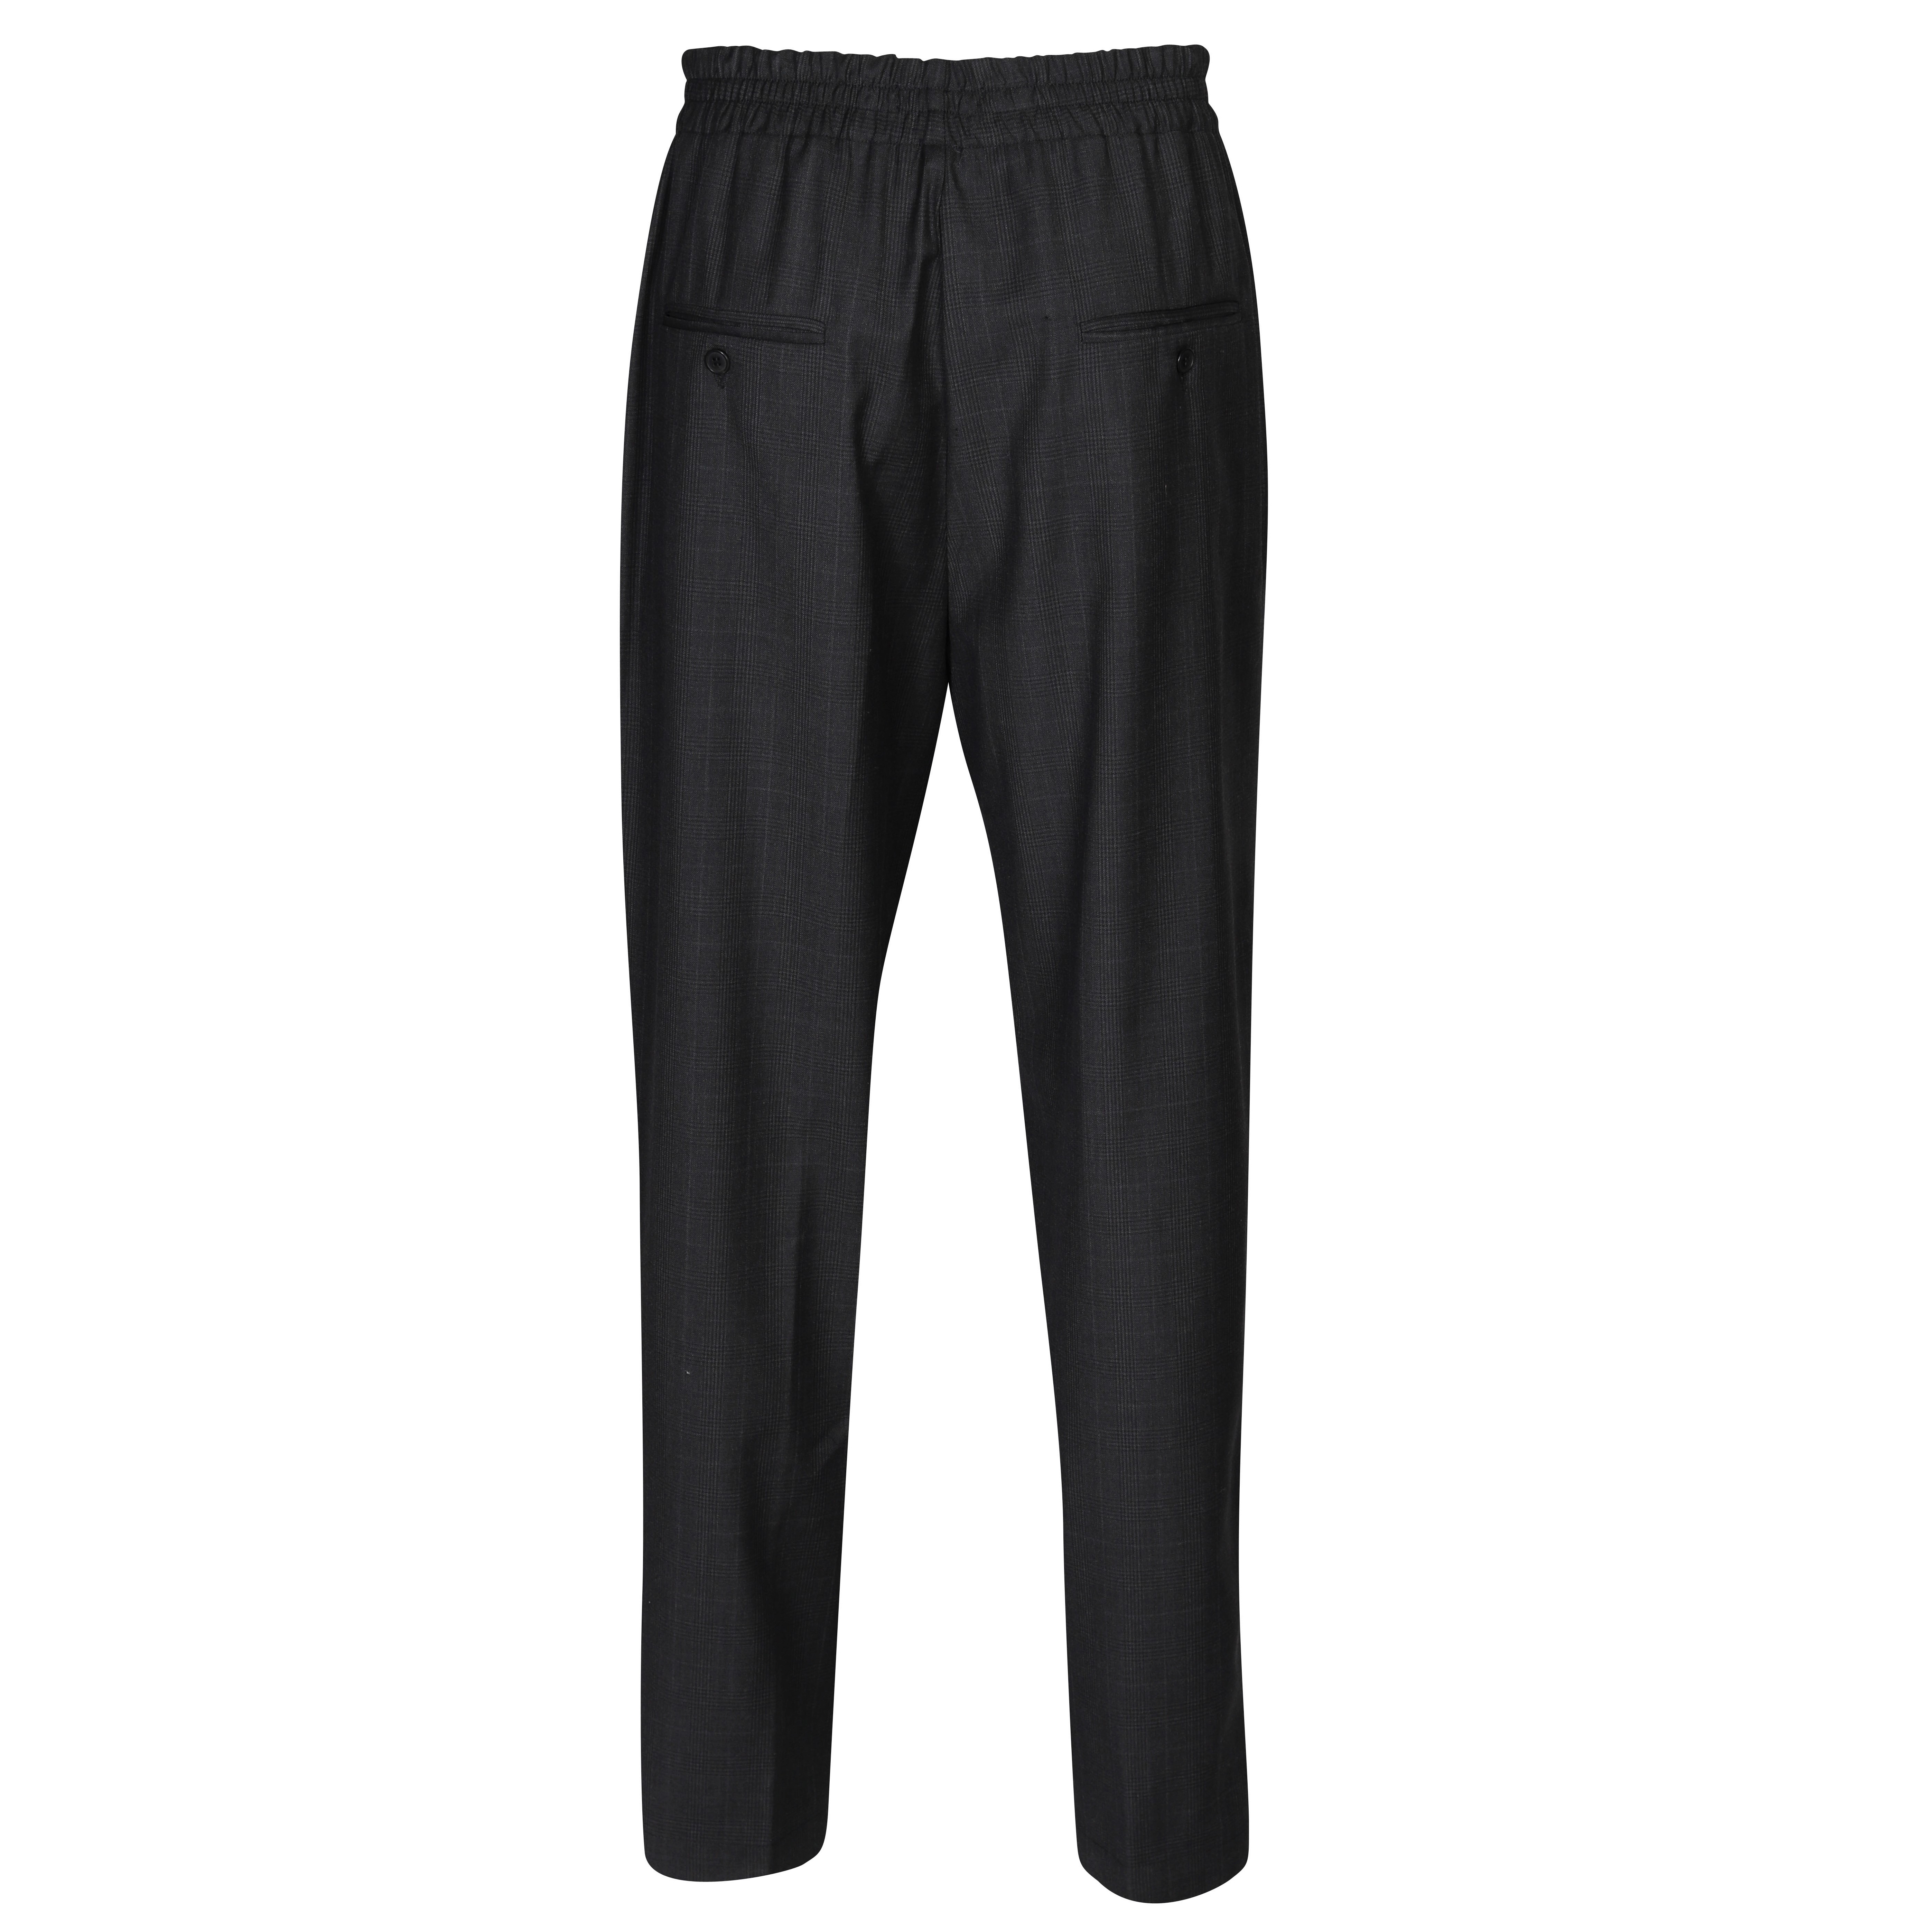 Isabel Marant Nailos Pants in Anthracite M